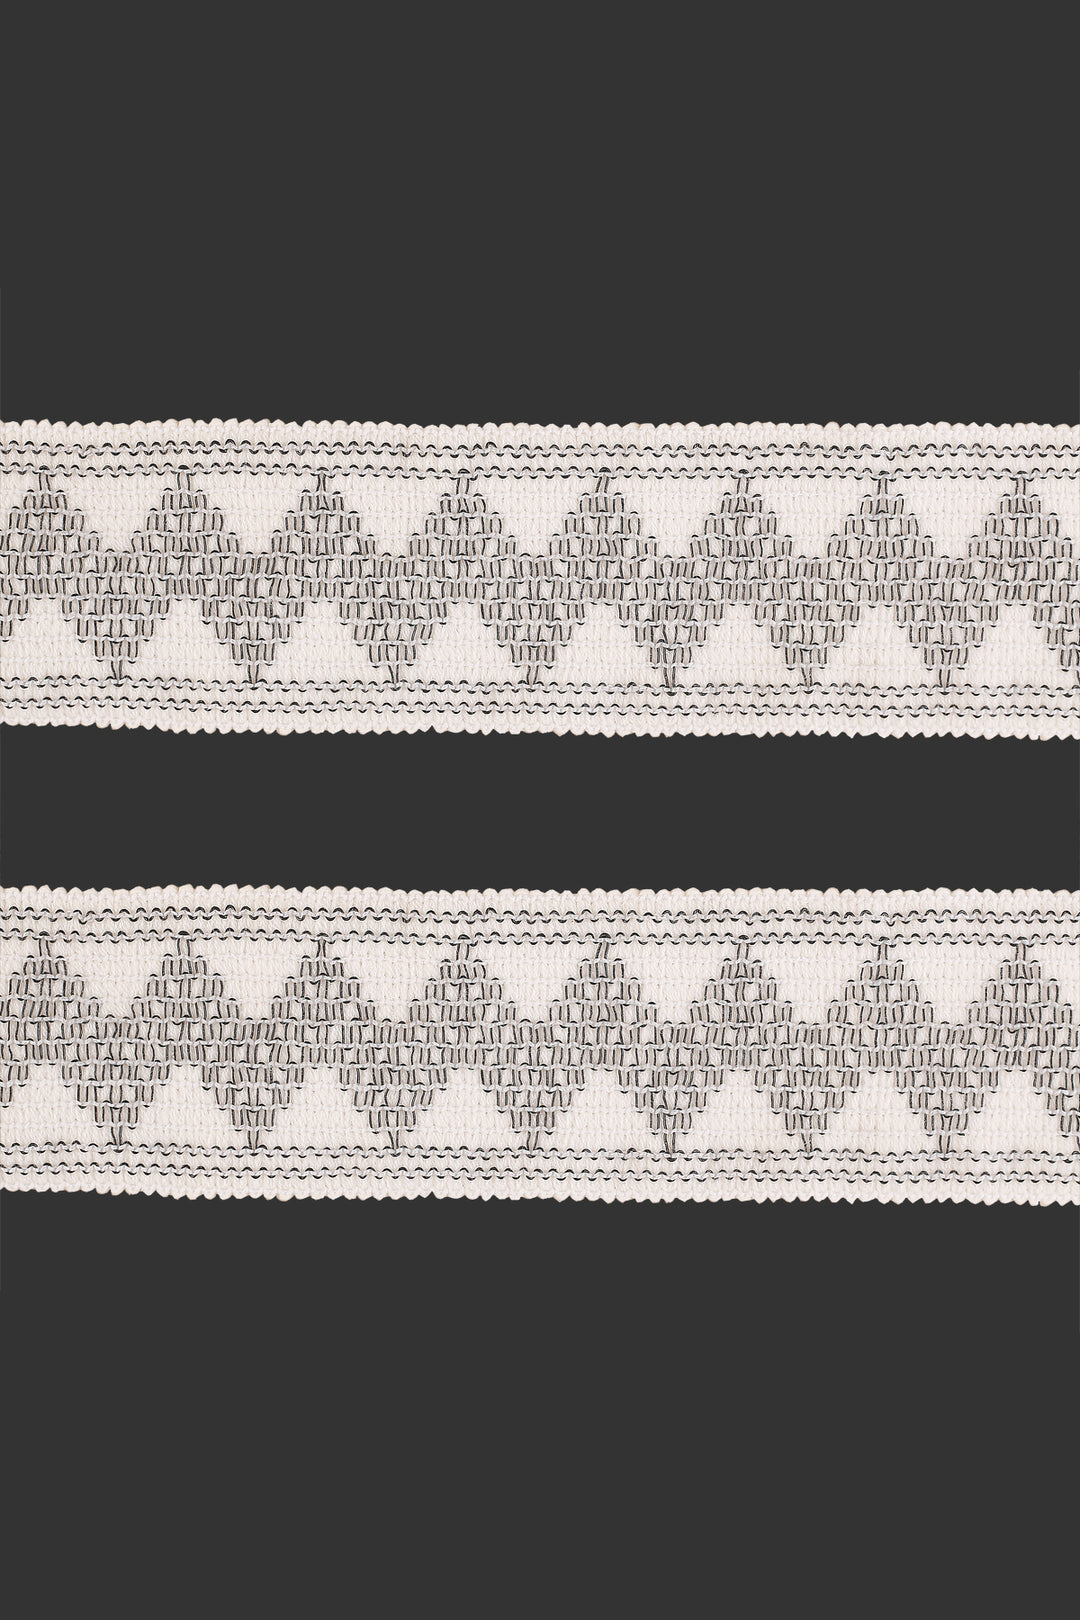 Wide Woven Patterned White Coloured Stretch Elastic